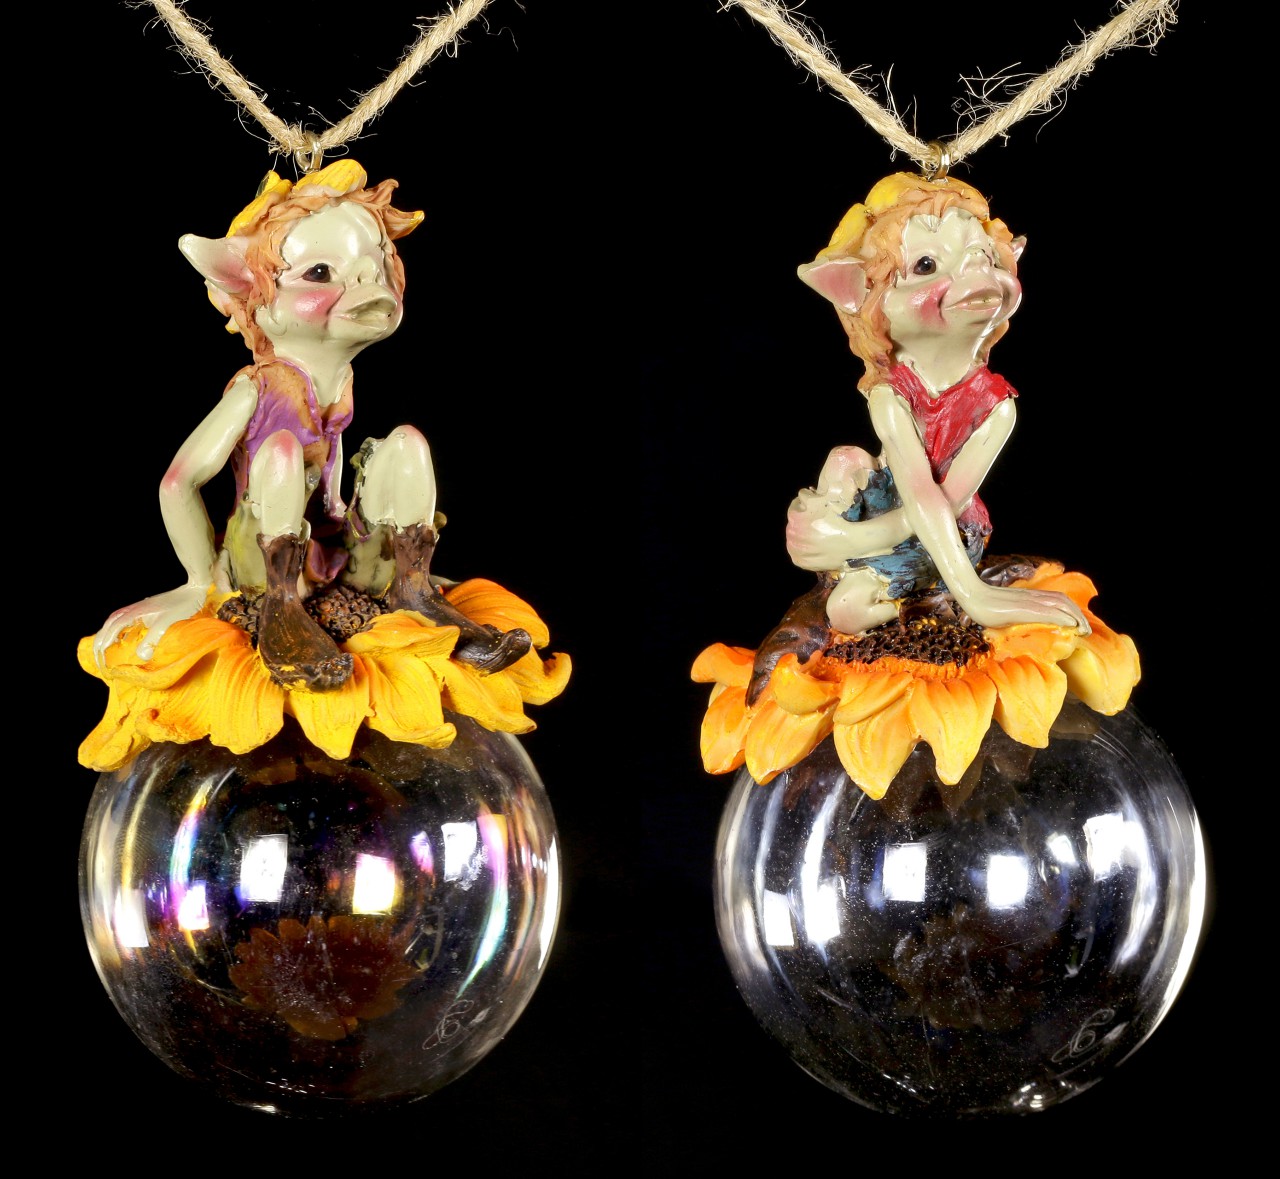 Pixie Figurine - With Flowers on Soap Bubbles - Set of 2